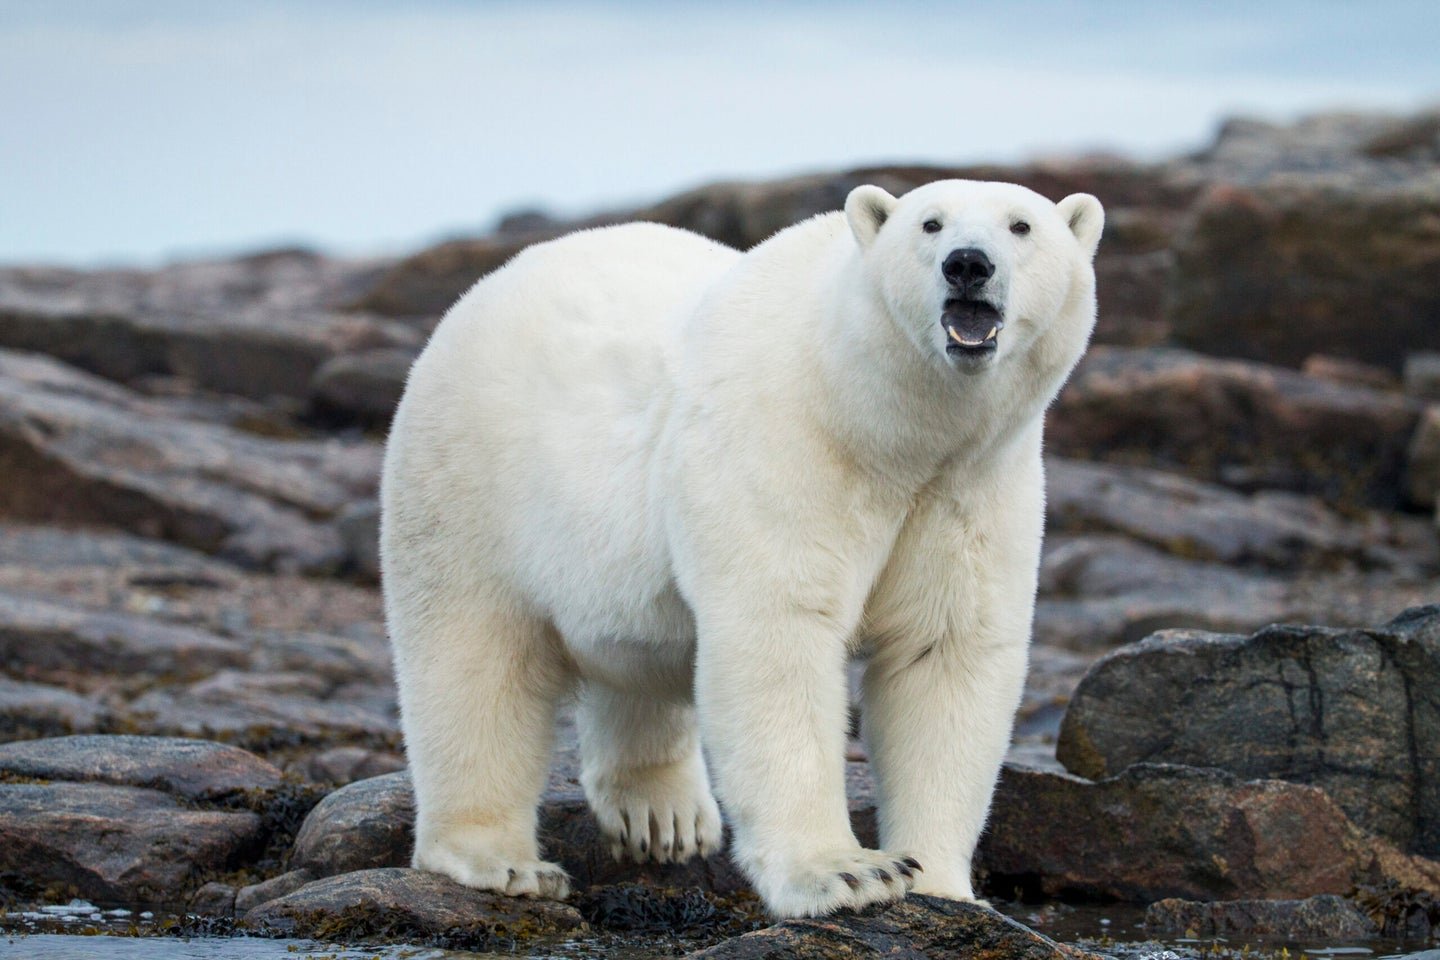 French Tourist Survives Rare Polar Bear Attack in Norway